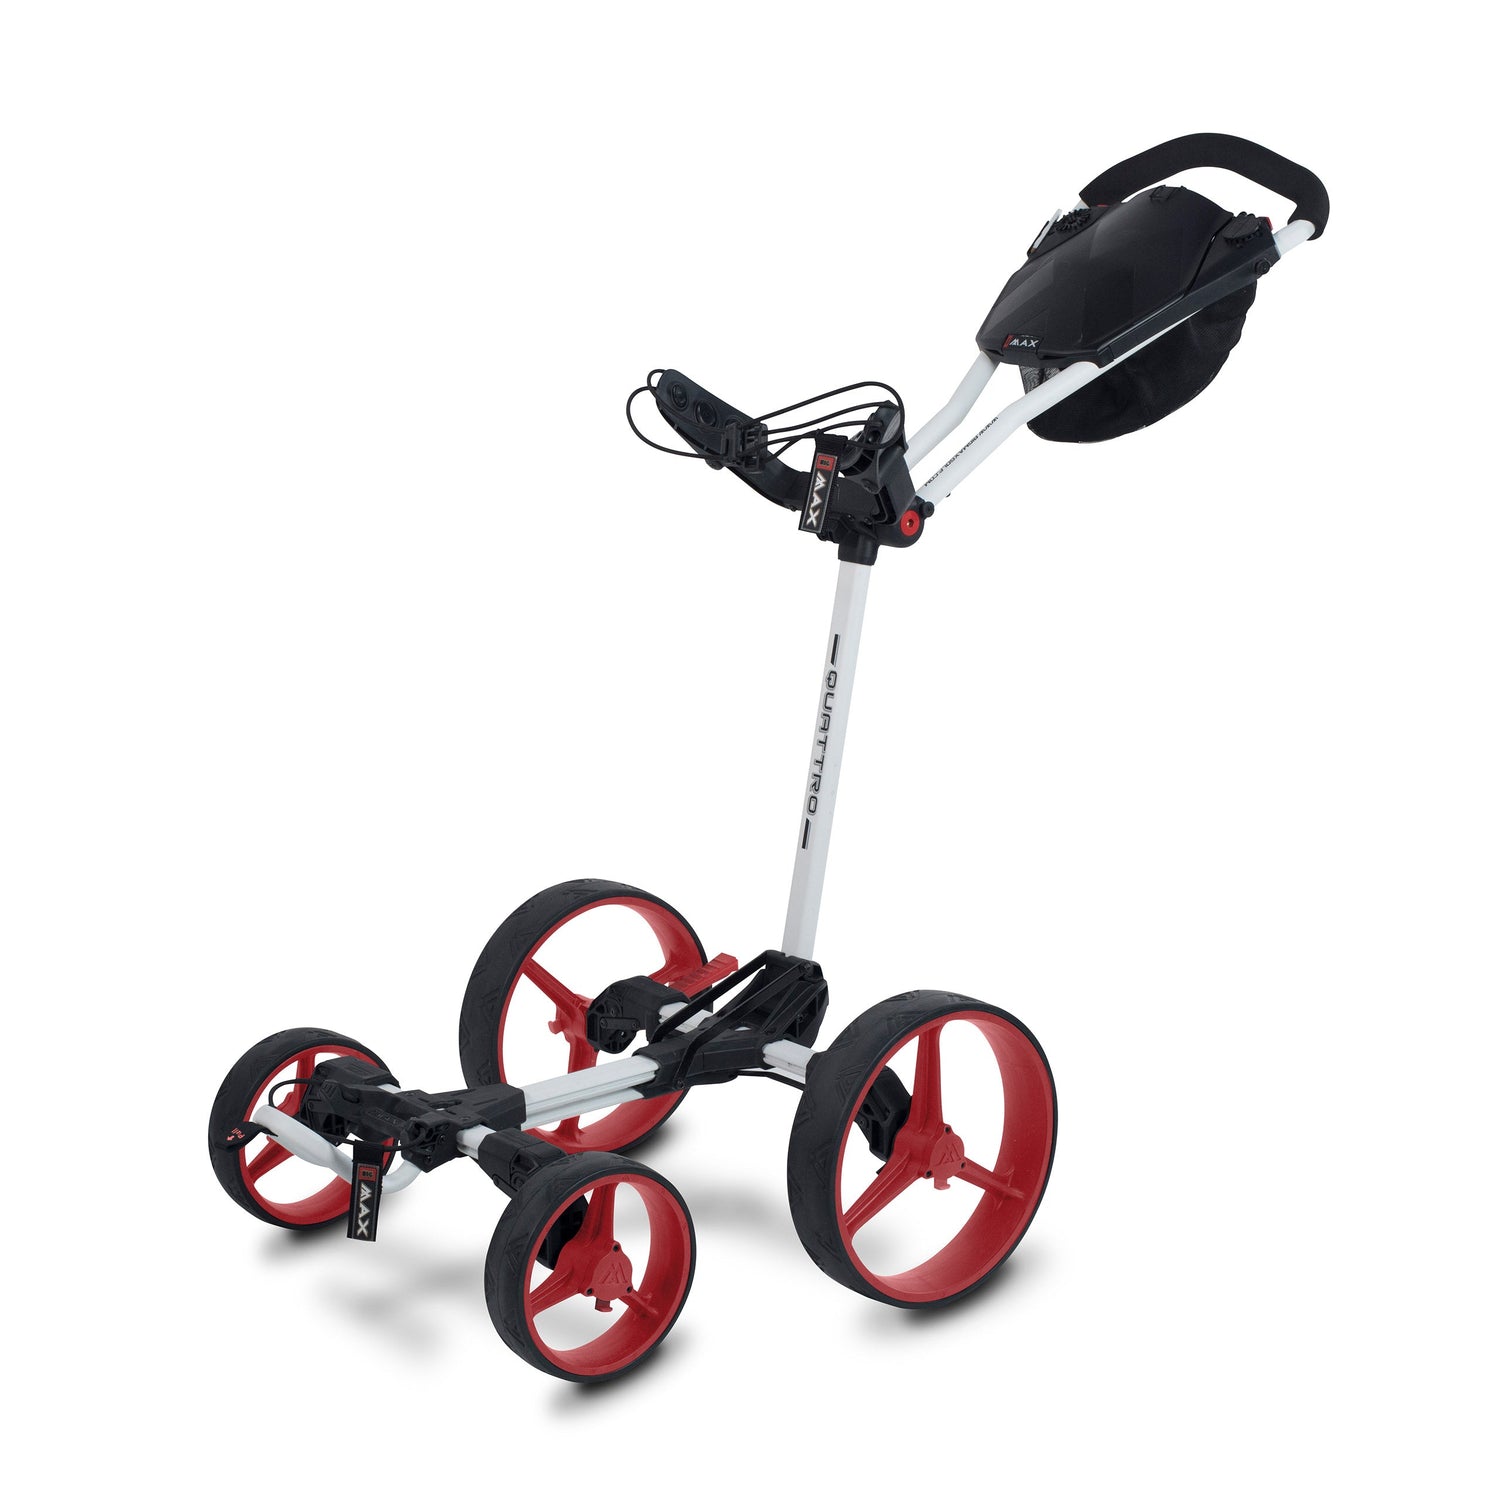 INDEPENDENT GOLF REVIEWS: Redefining the compact golf push cart